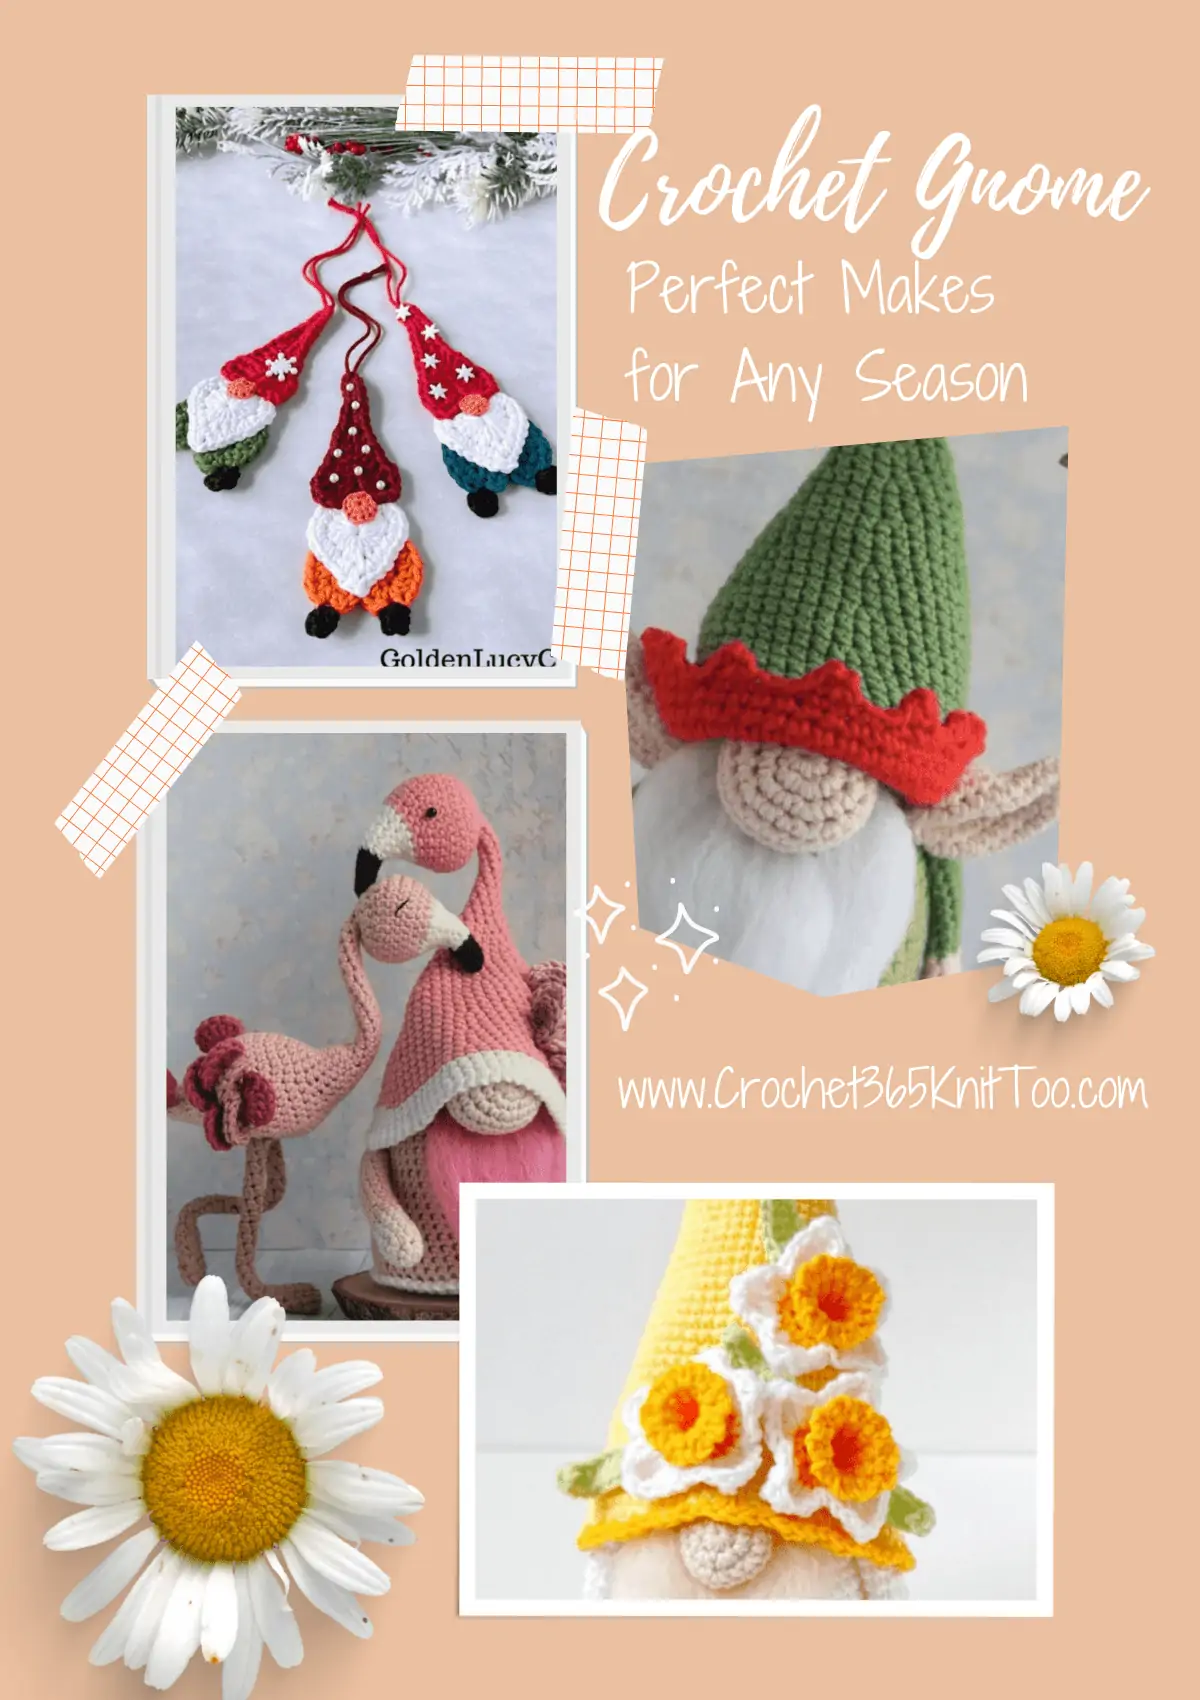 Crochet gnome collage photo for Pinterest that includes 2D gnome ornaments, a flamingo and pink gnome, a elf gnome, and a daisy gnome.